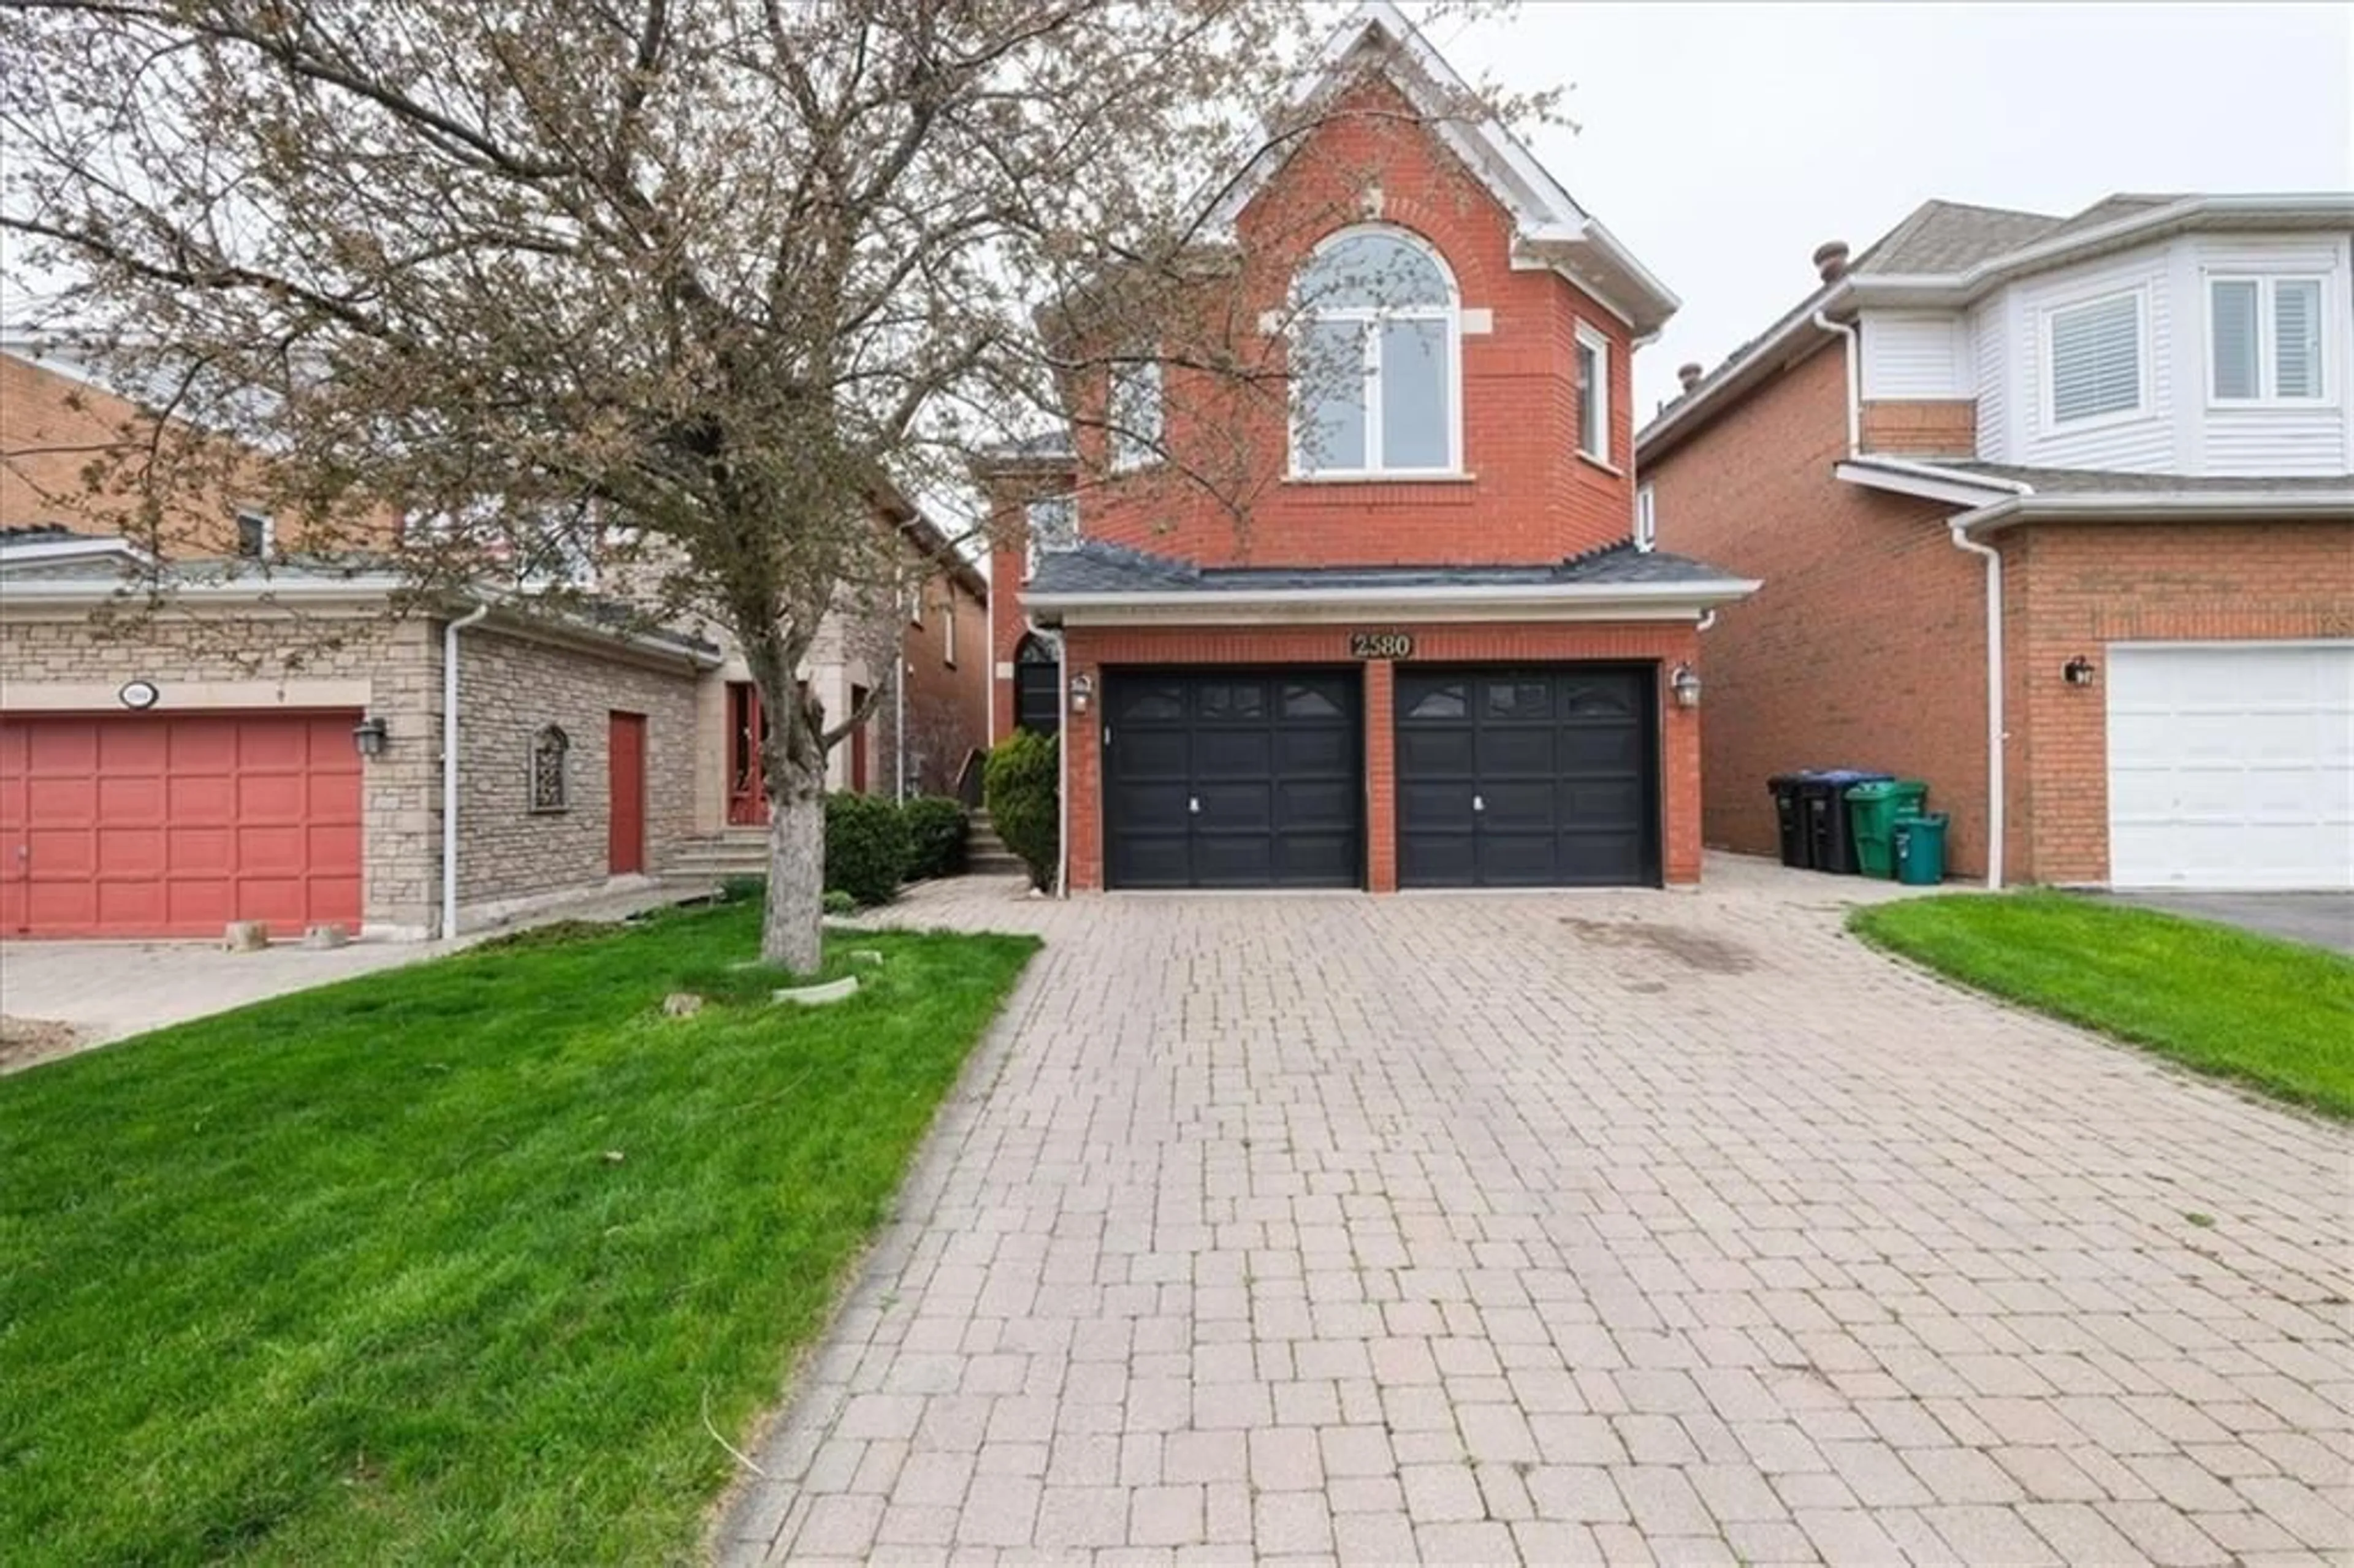 Home with brick exterior material for 2580 Strathmore Cres, Mississauga Ontario L5M 5L1